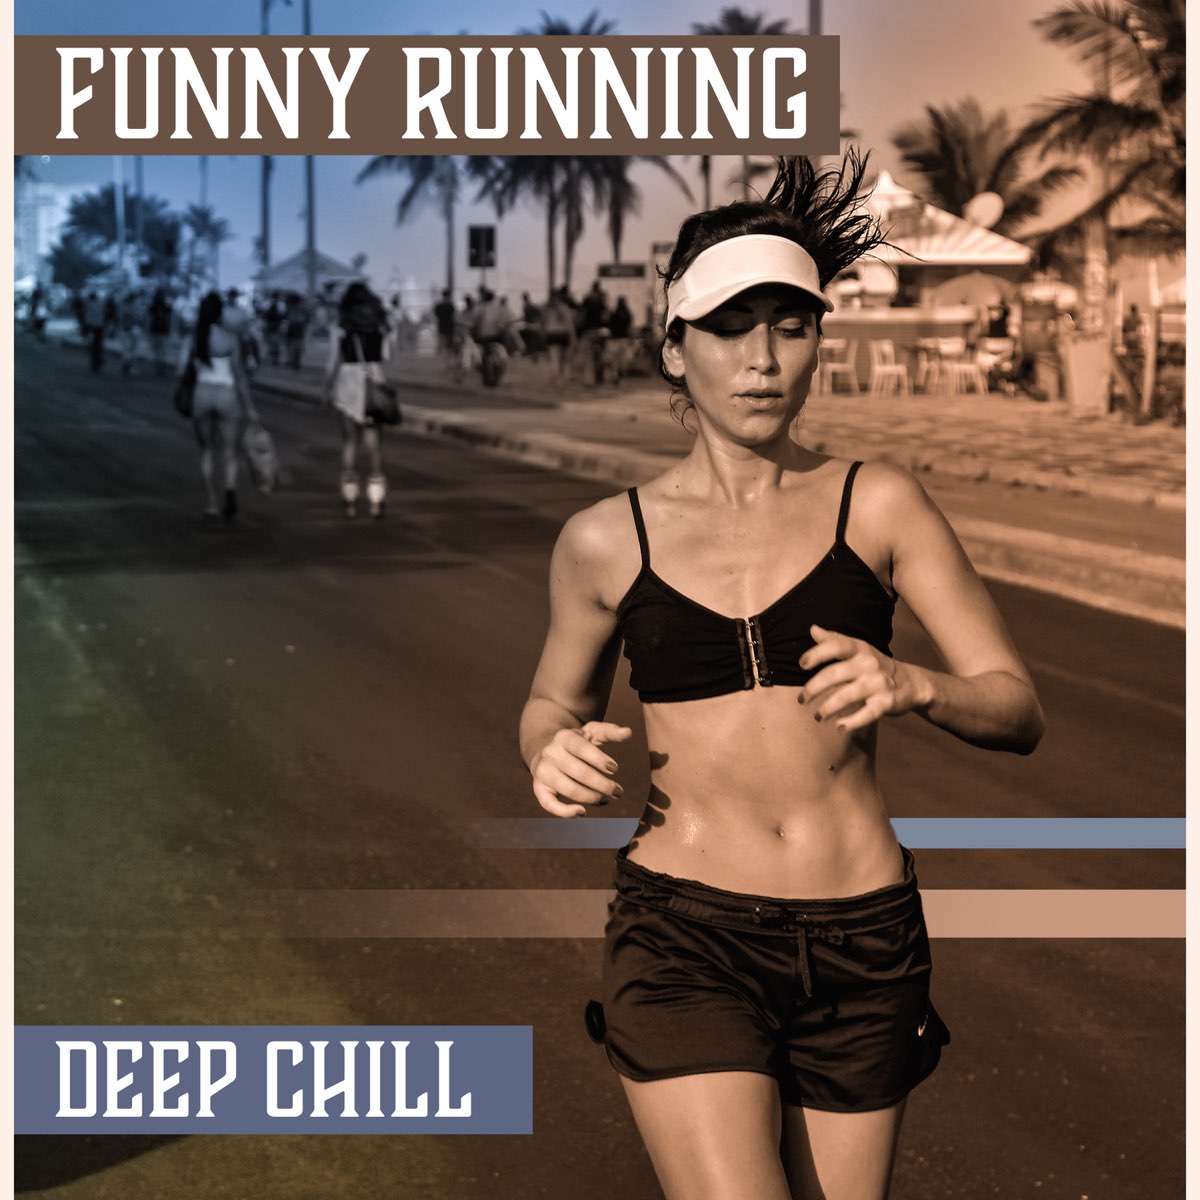 Funny Running: Deep Chill - Running on the Beach, Hot Summer, Jogging, Be  Fit, Fitness Workout by Good Form Running Club on Apple Music